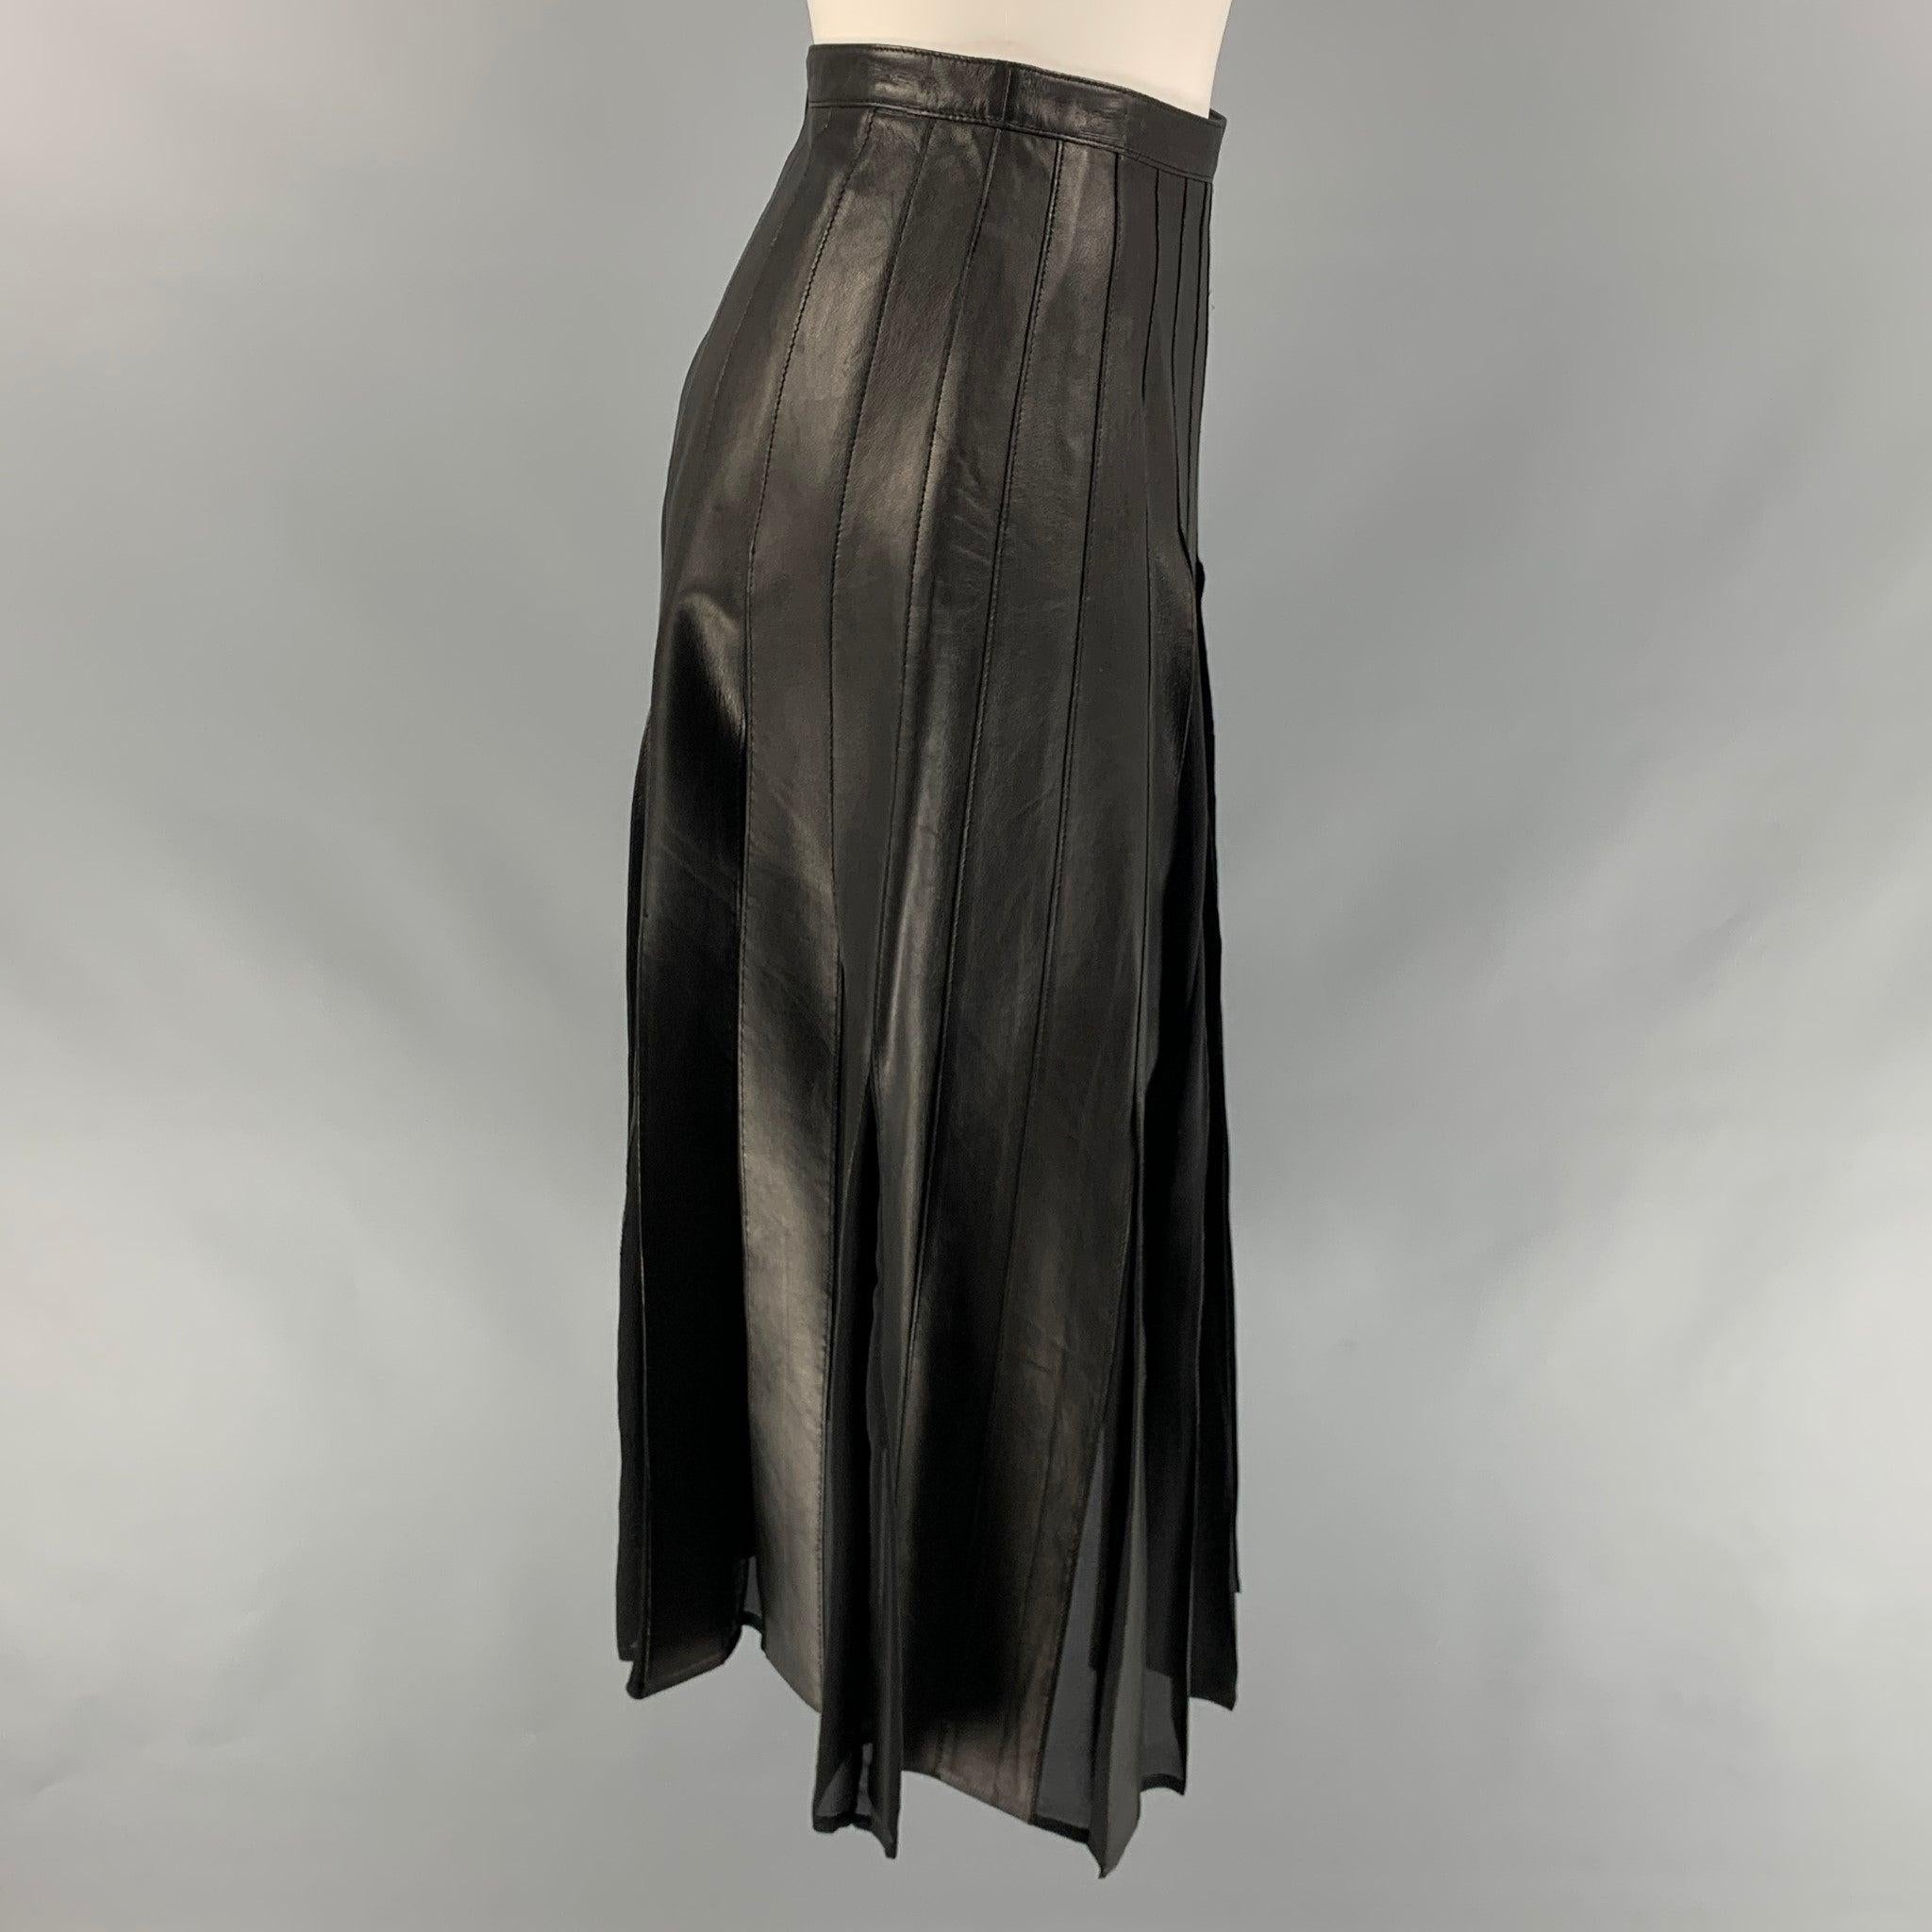 BURBERRY LONDON skirt comes in a black silk / leather featuring a pleated style, mid-calf, and a back zip up closure.
Very Good
Pre-Owned Condition. Fabric tag removed.  

Marked:   Size tag removed.  

Measurements: 
  Waist: 24 inches  Hip: 32